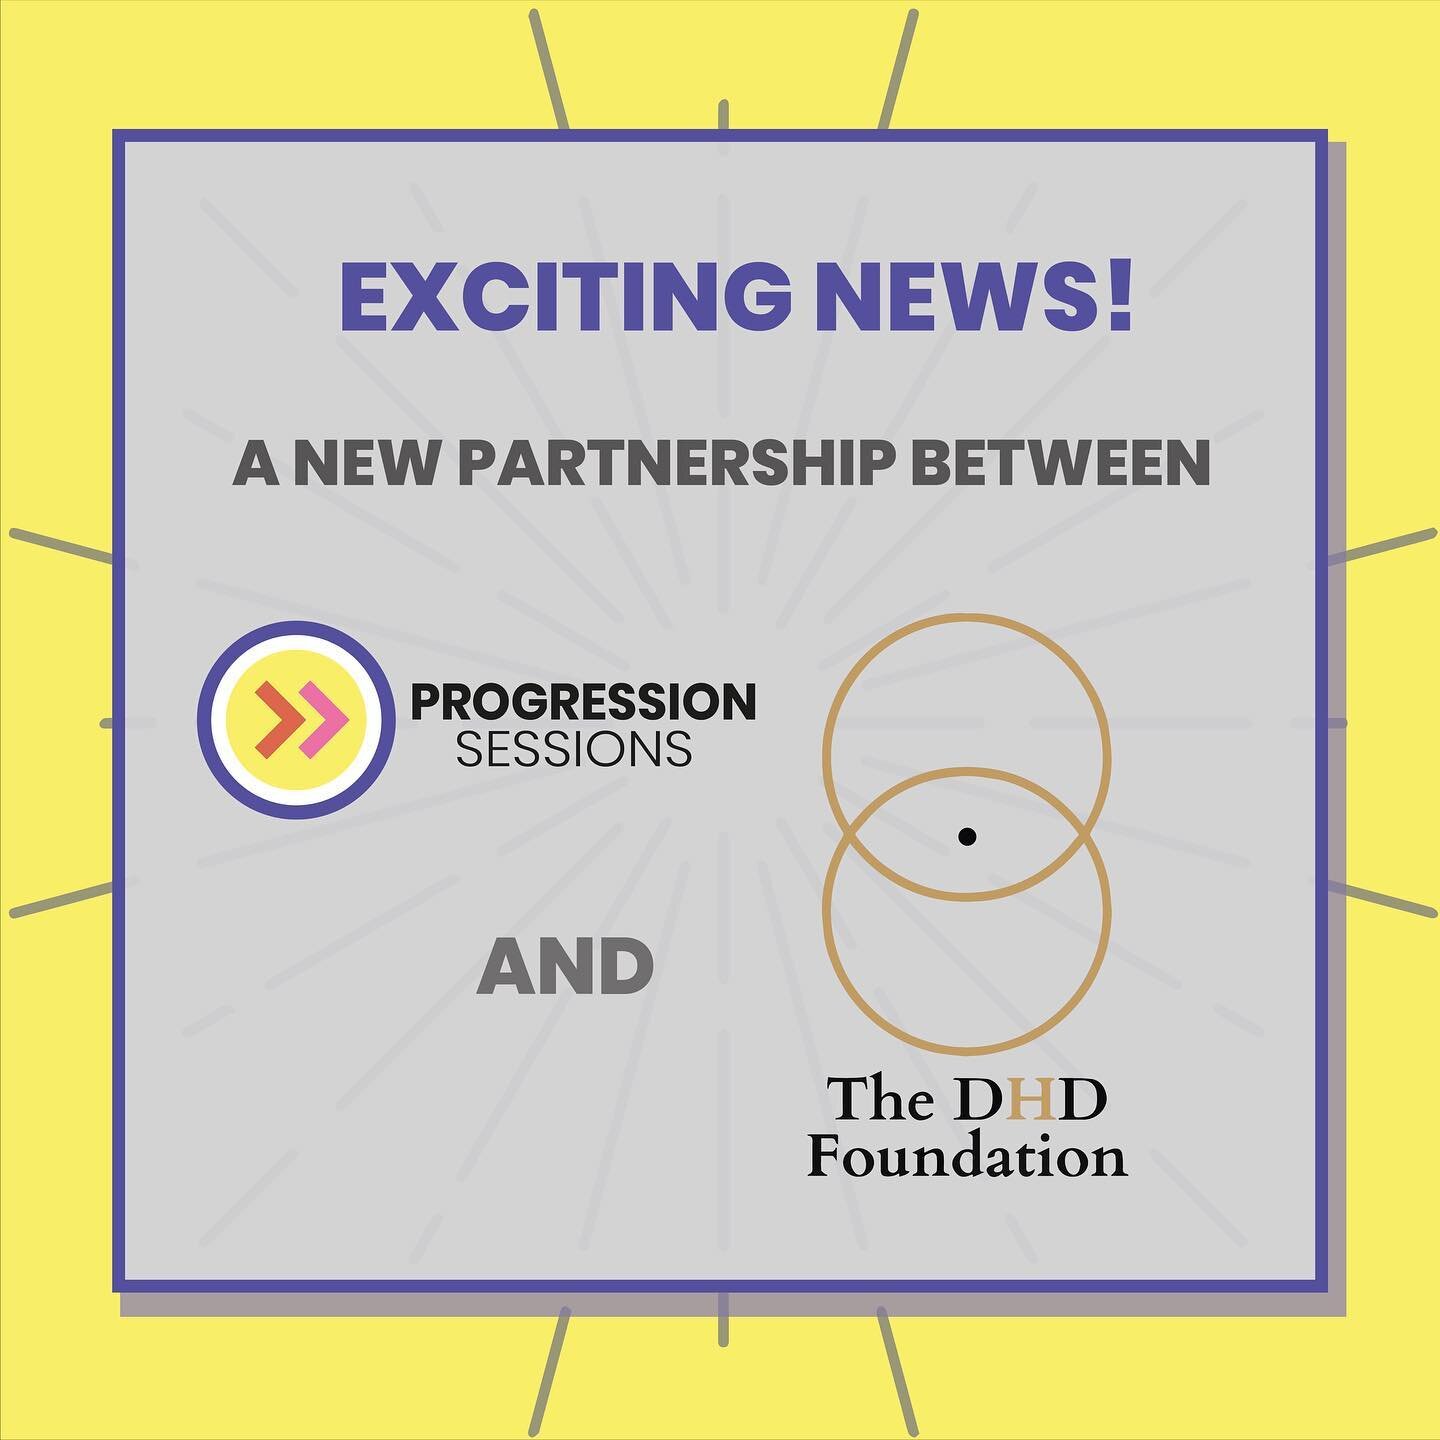 We are very excited to announce a new partnership with @dhdfoundation. More news to come soon!